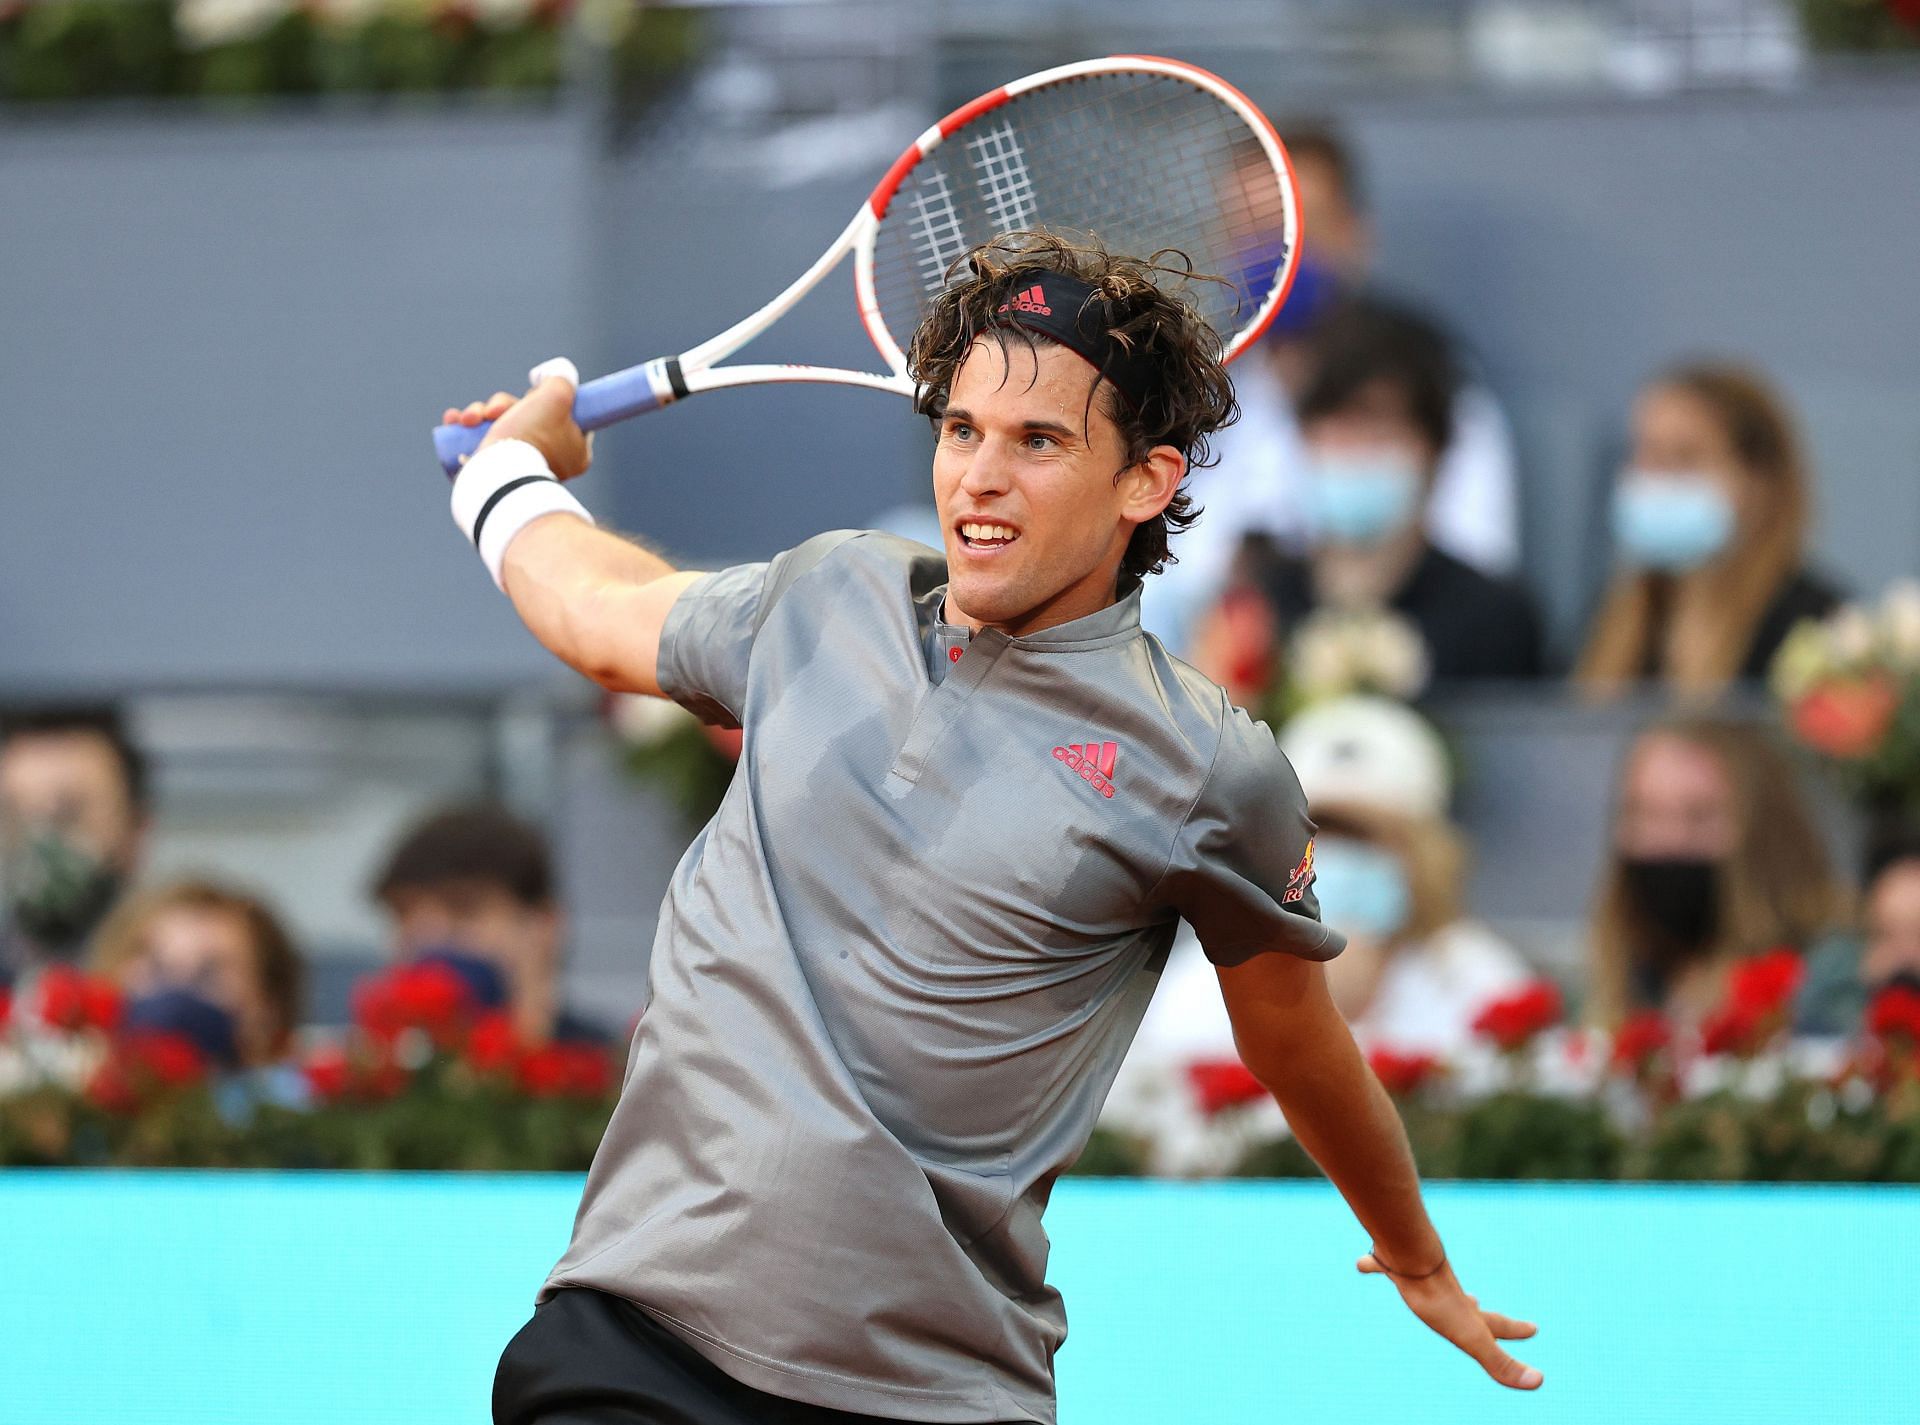 Dominic Thiem at the 2021 Mutua Madrid Open - Day Six